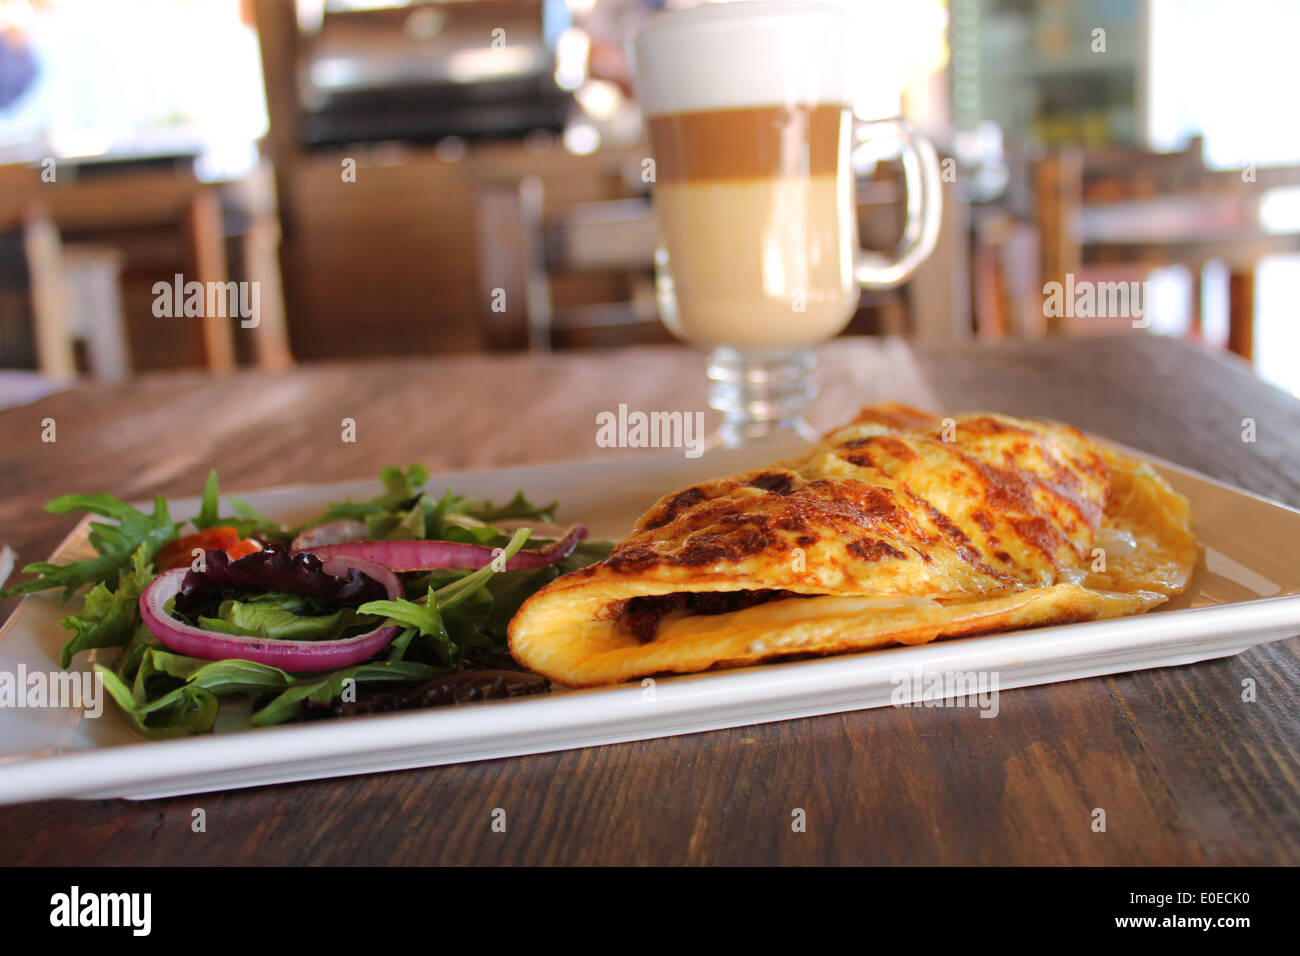 Breakfast with coffee and omelette Stock Photo